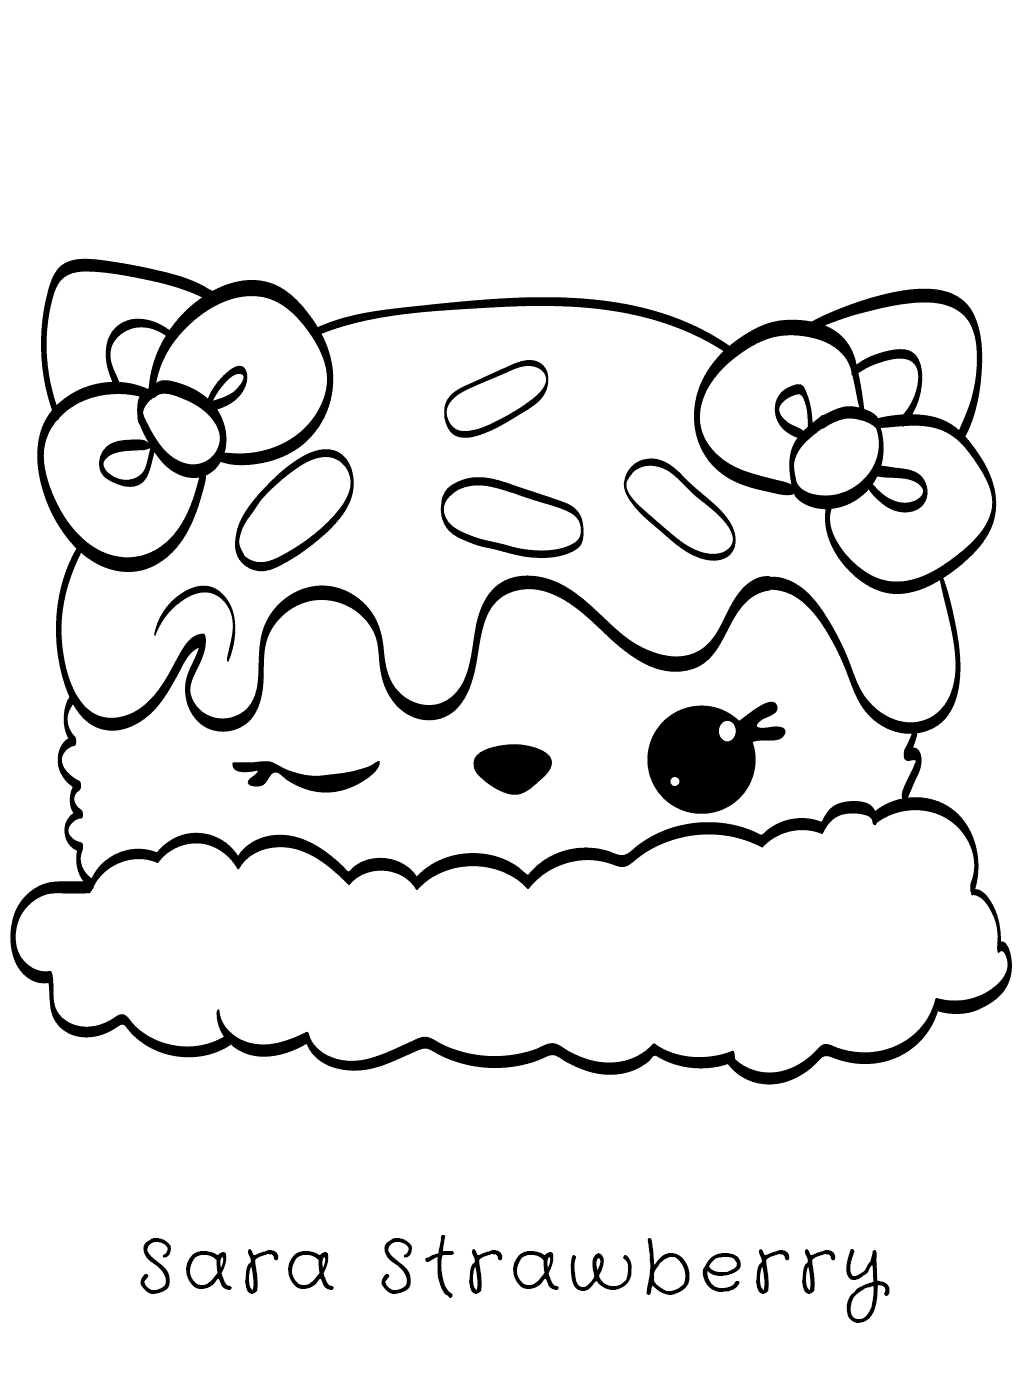 Num Noms Coloring Pages - Best Coloring Pages For Kids